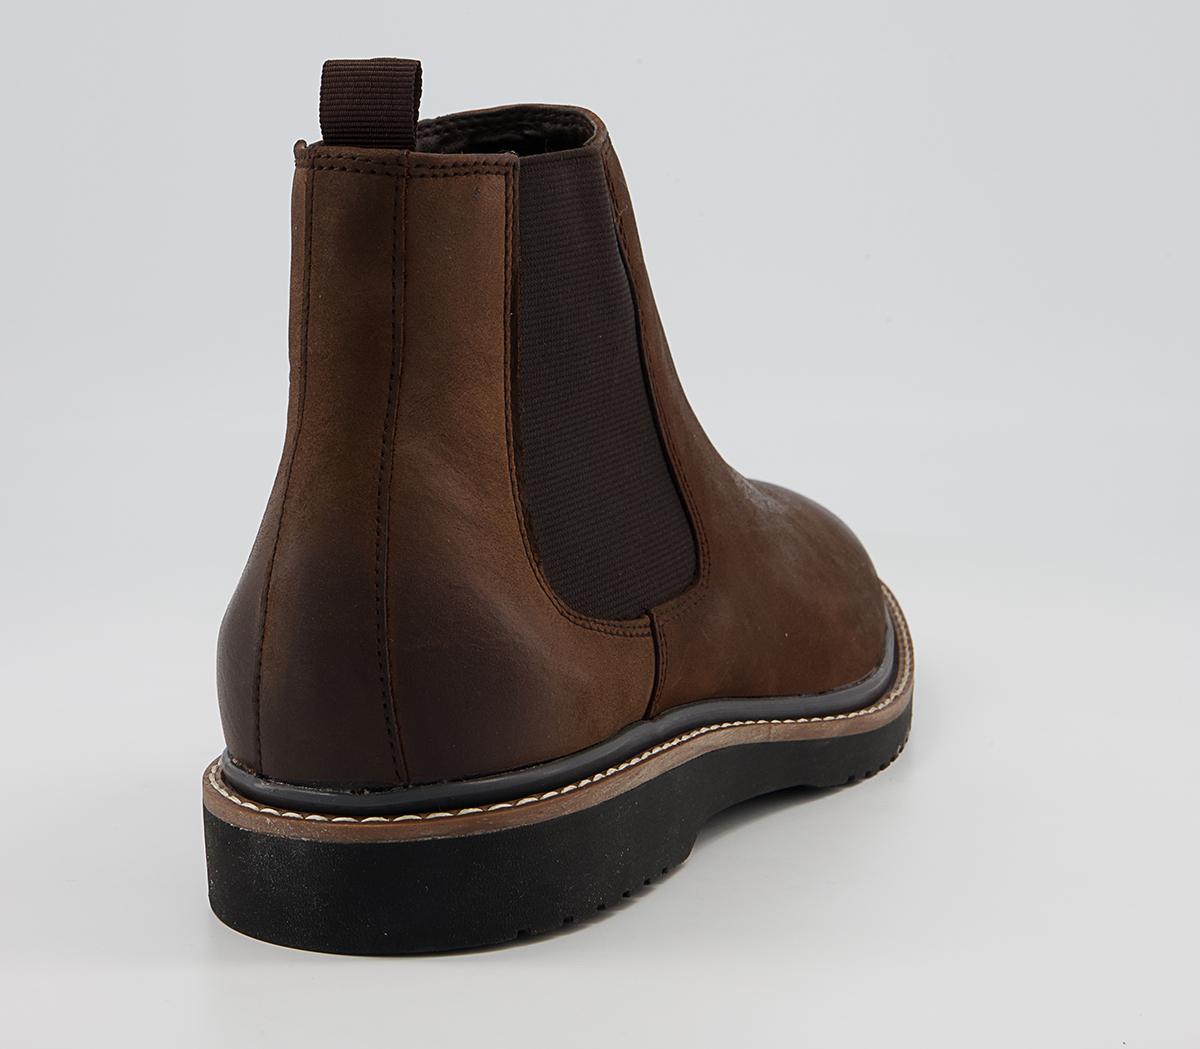 OFFICE Bolton Wedge Chelsea Boots Brown Leather - Men’s Boots